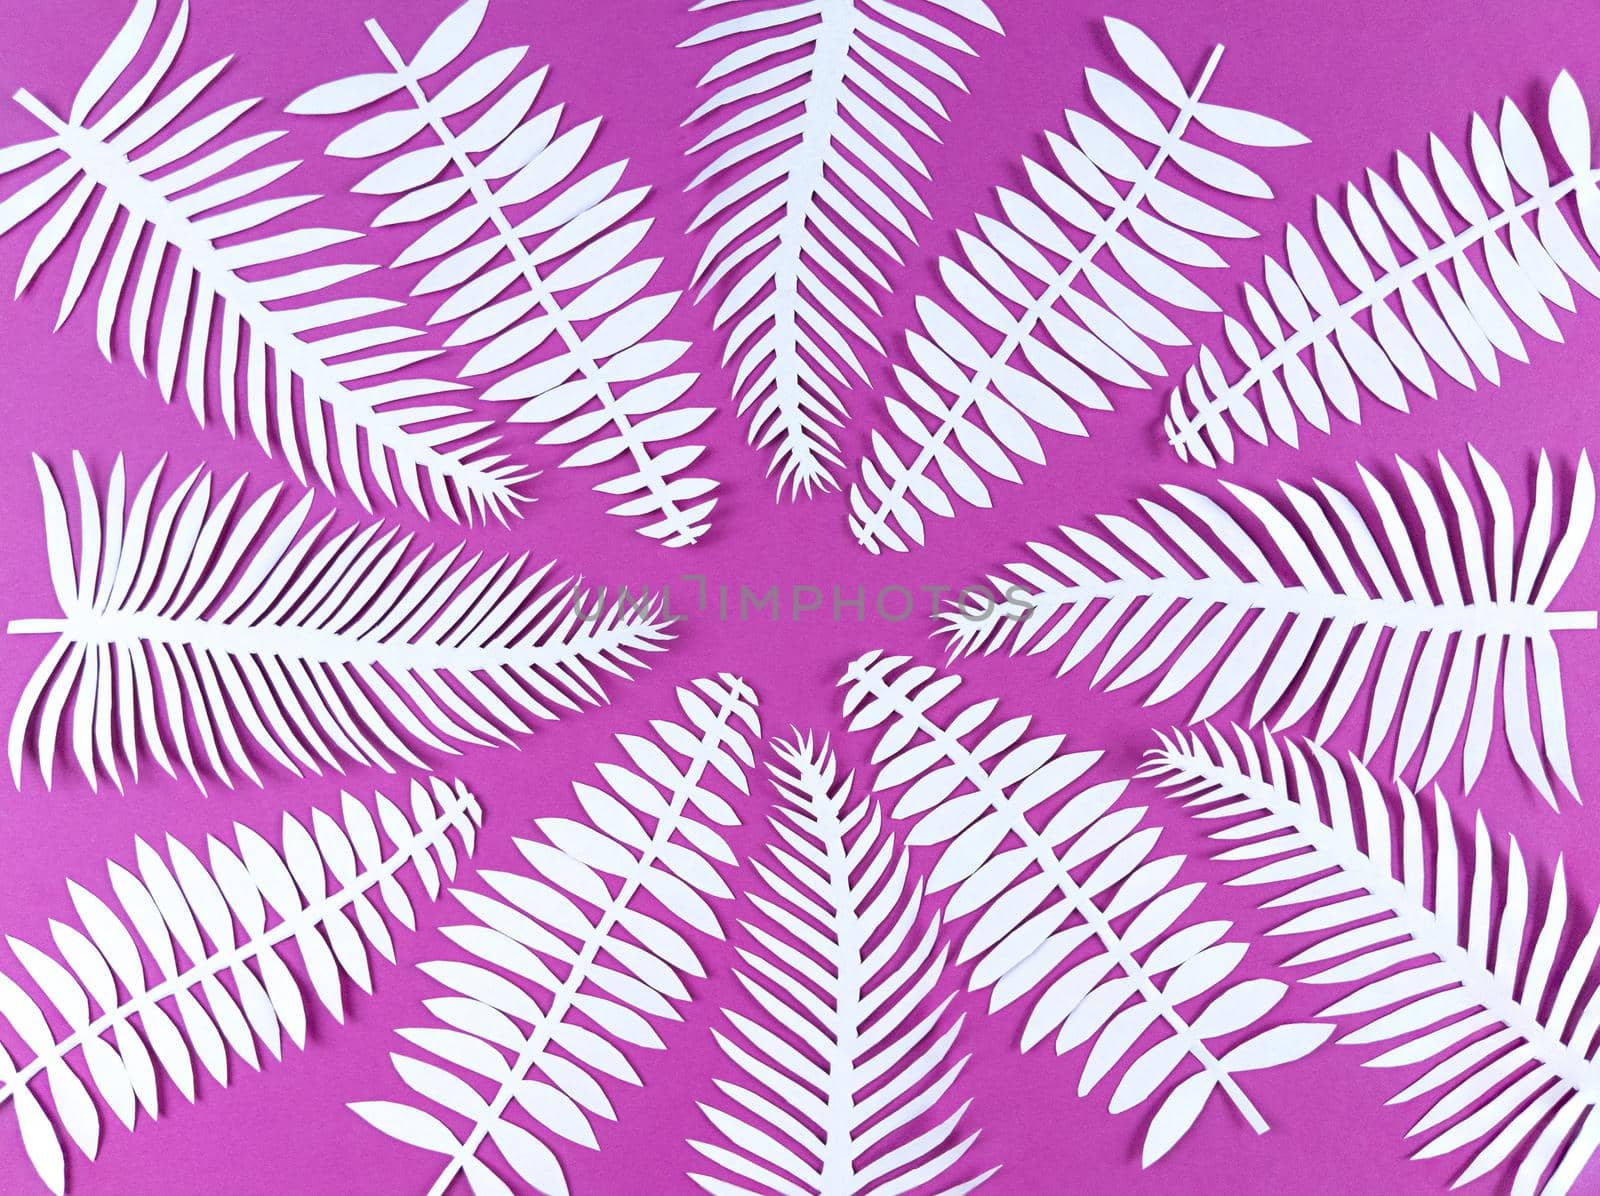 White paper cut leaves on a pink background.